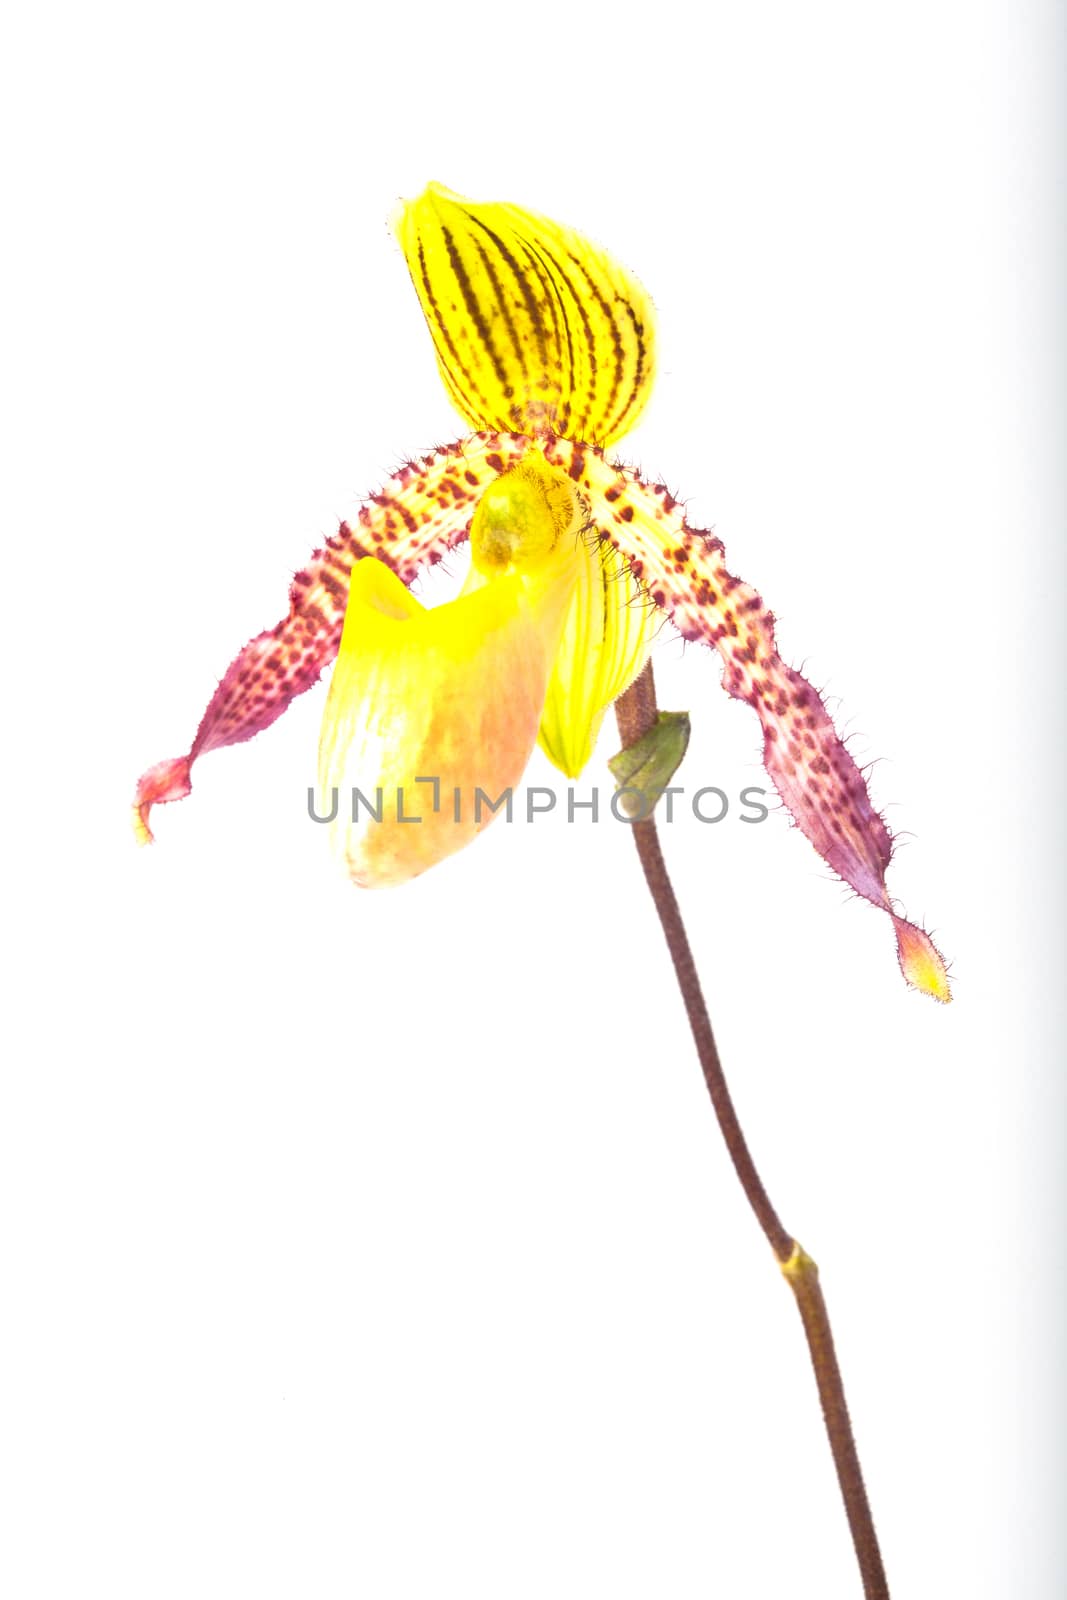 exotic tropical orchid species Paphiopedilum appletonianum lady's slipper flower closeup isolated on white